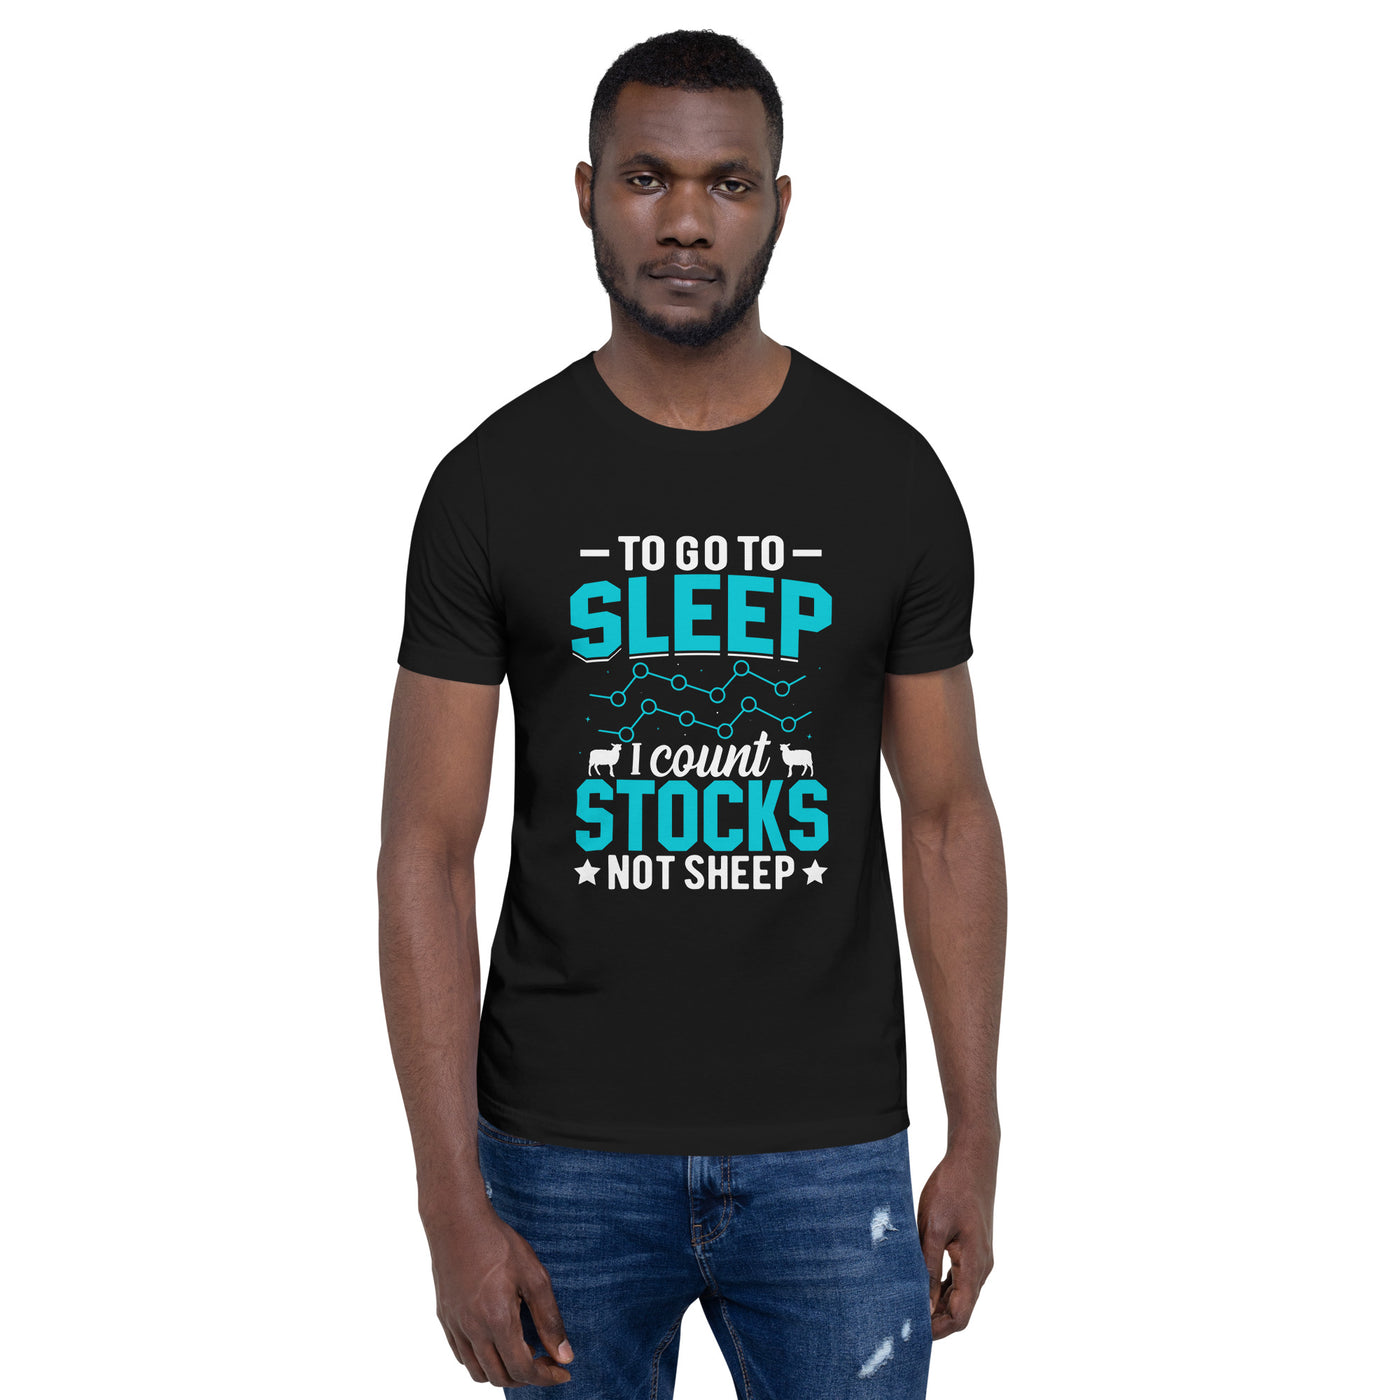 To go to sleep, I count stocks not sheep (DB) - Unisex t-shirt